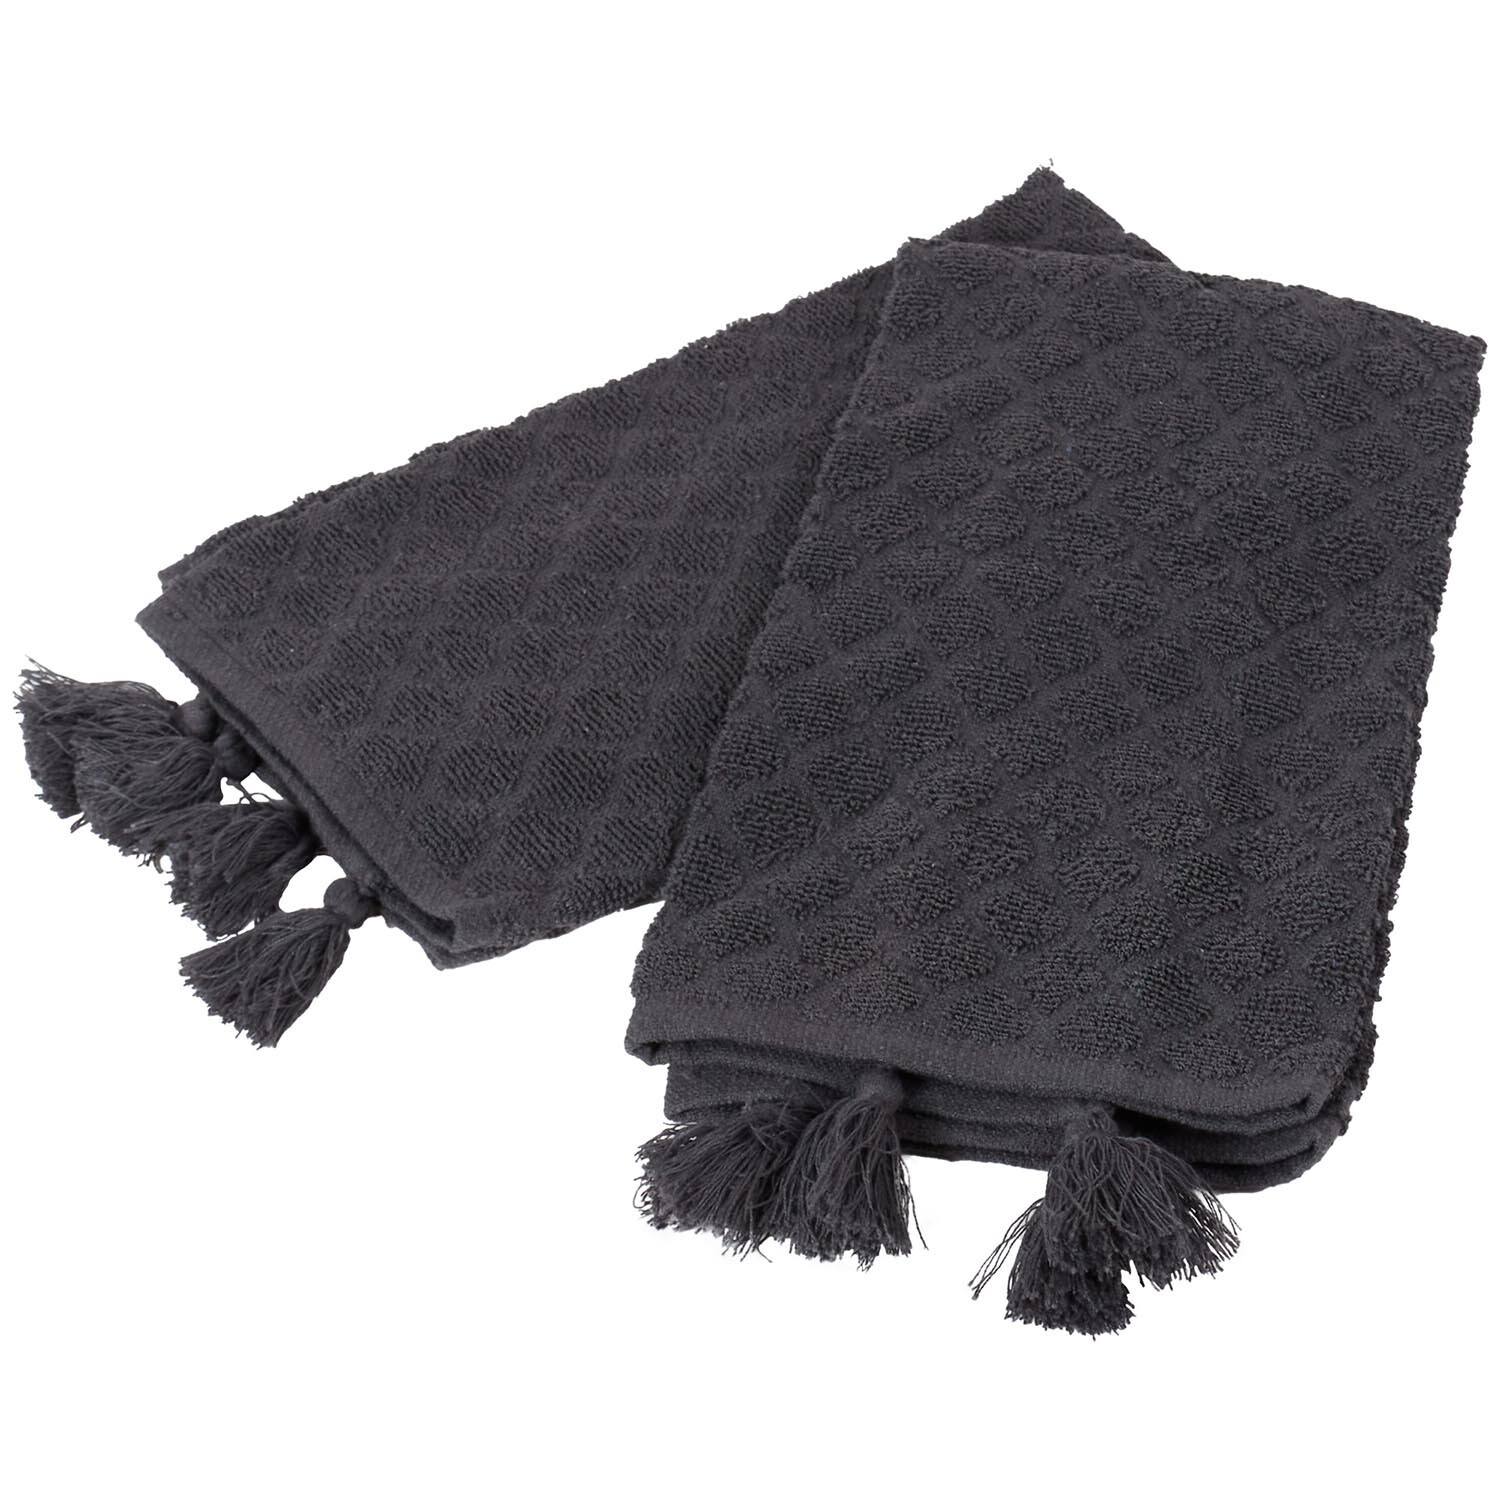 Pack of 2 Dobby Terry Kitchen Towels with Tassels - Dark Grey Image 6